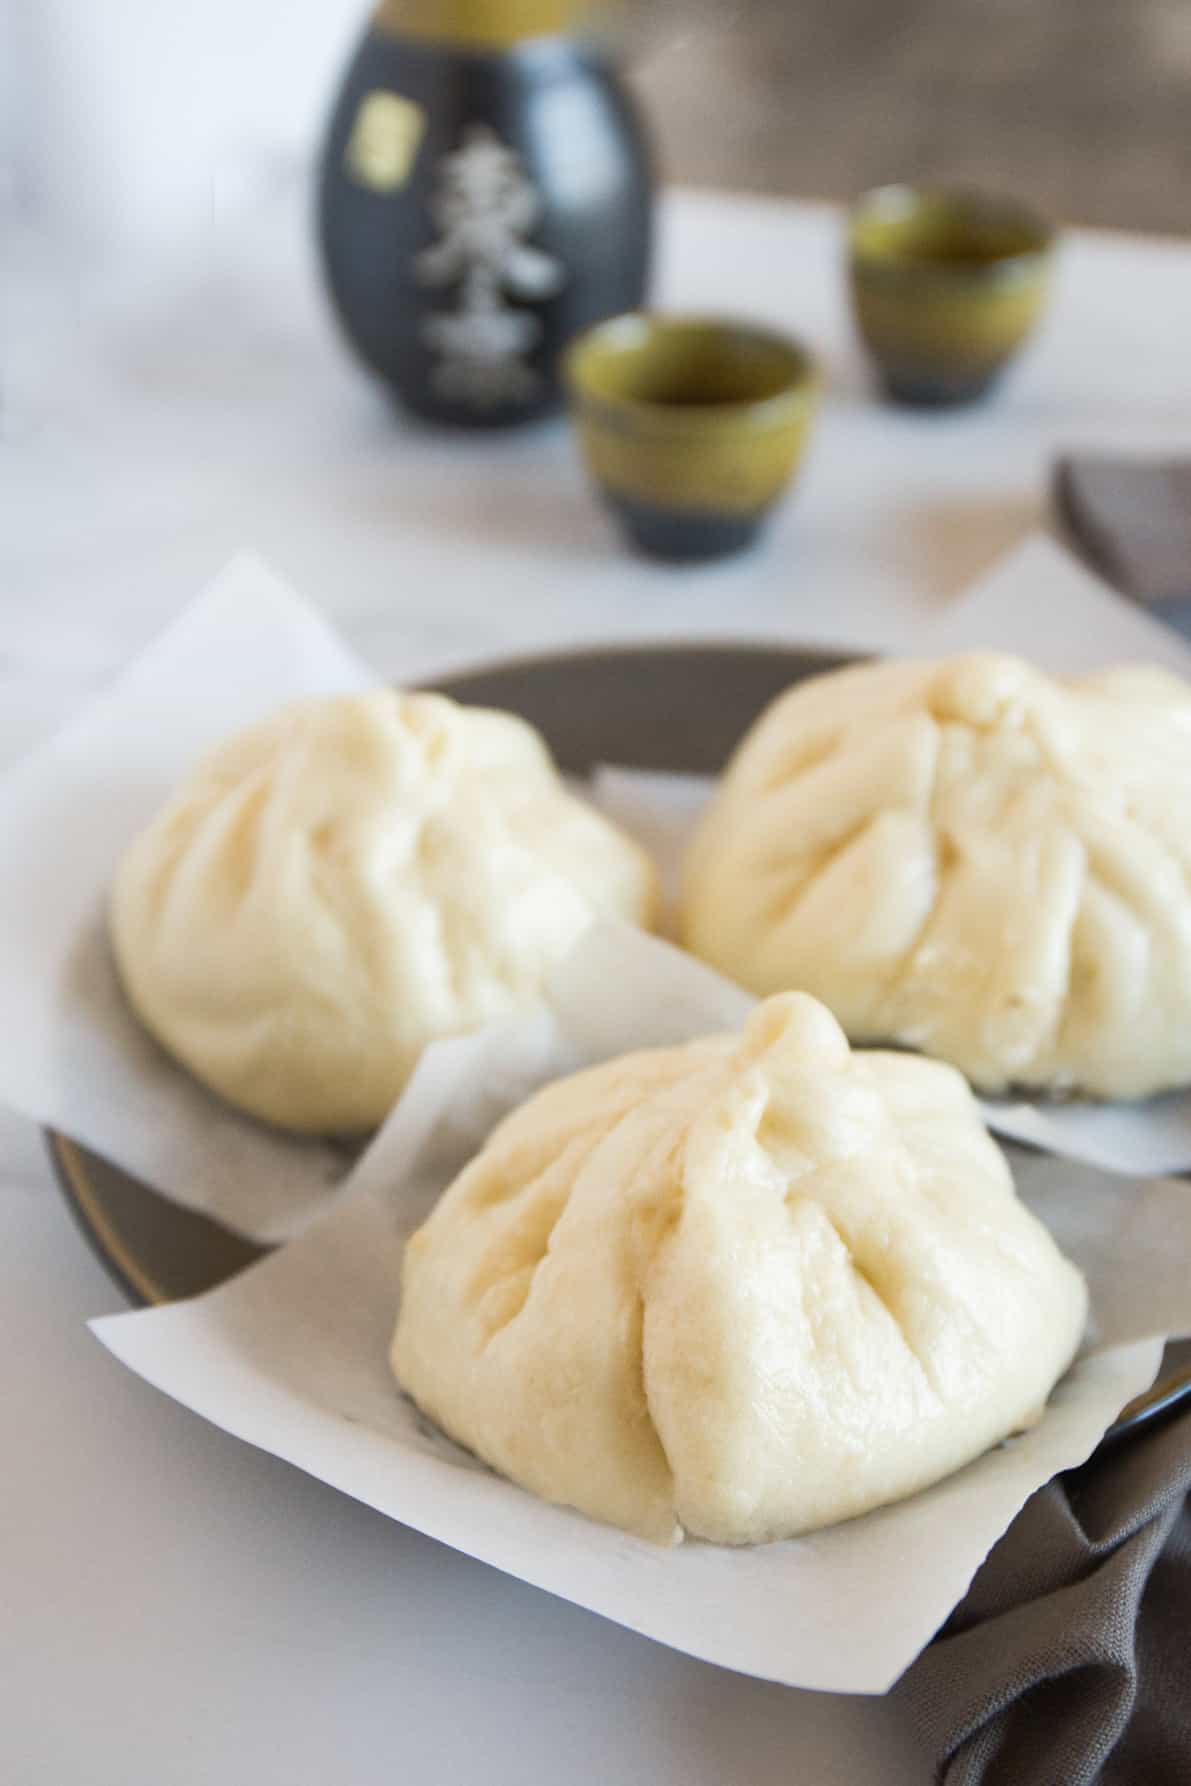 Steamed Japanese Beef Buns are soft, fluffy buns filled with a satisfying combination of meat and vegetables. So easy and delicious!